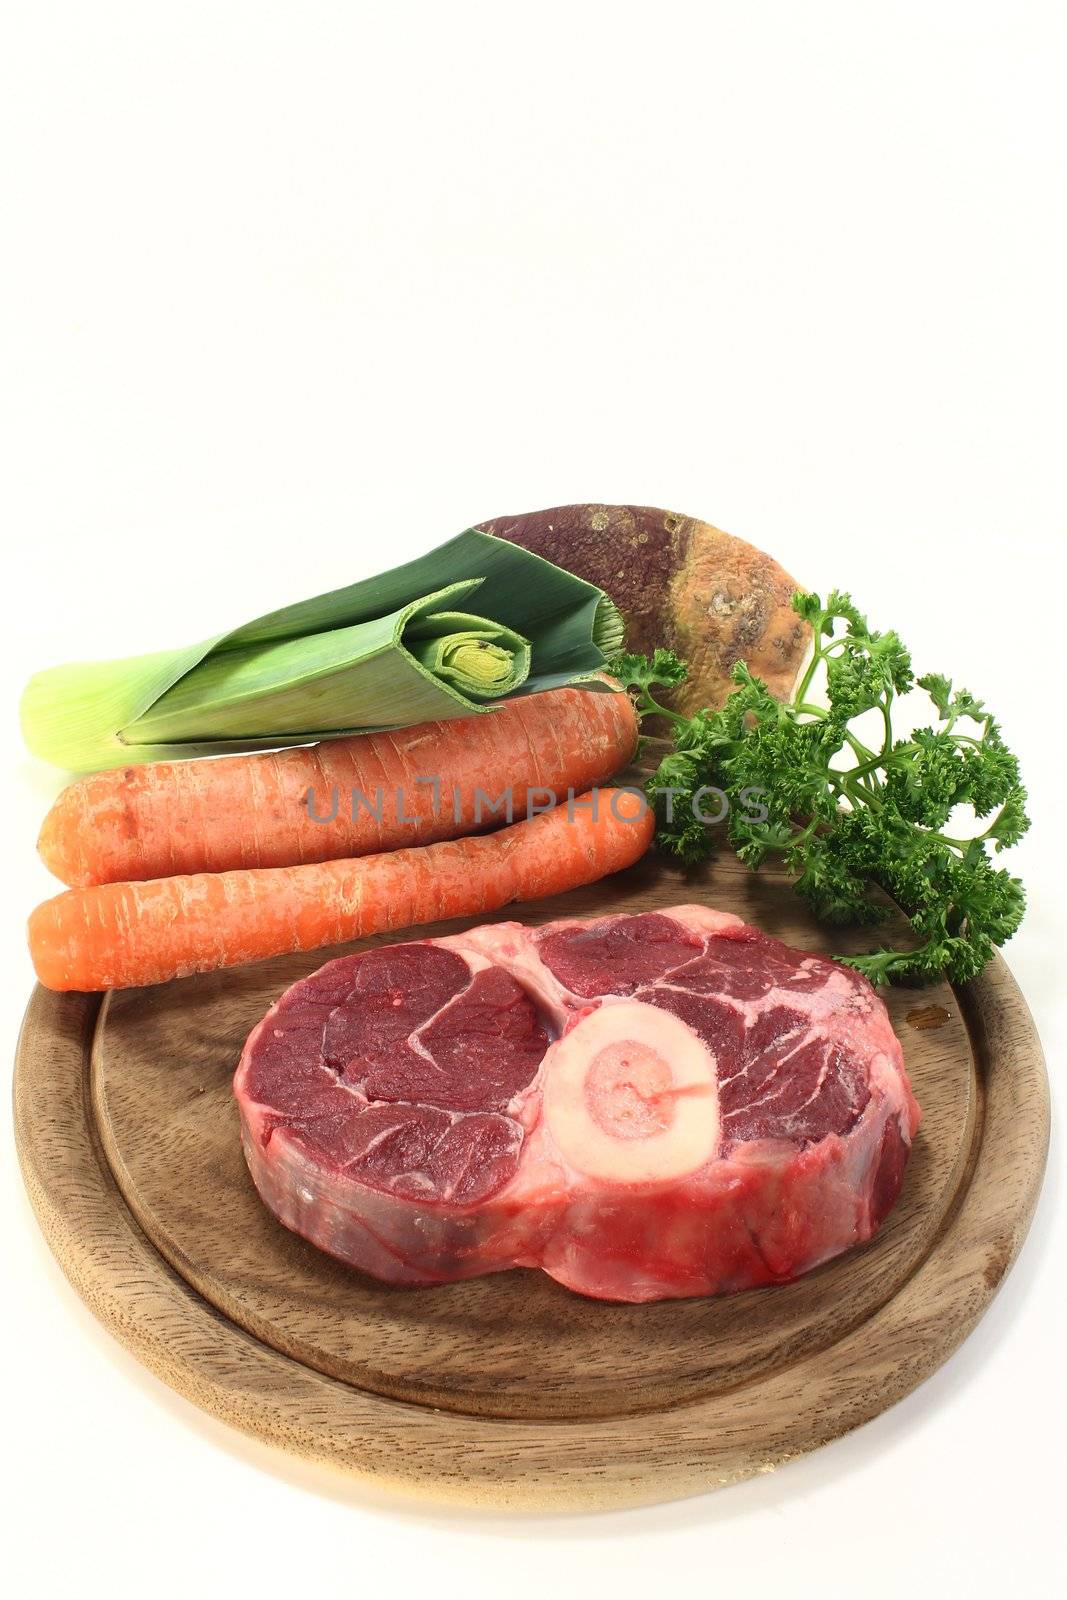 Cook meat and soup vegetables on a wooden board